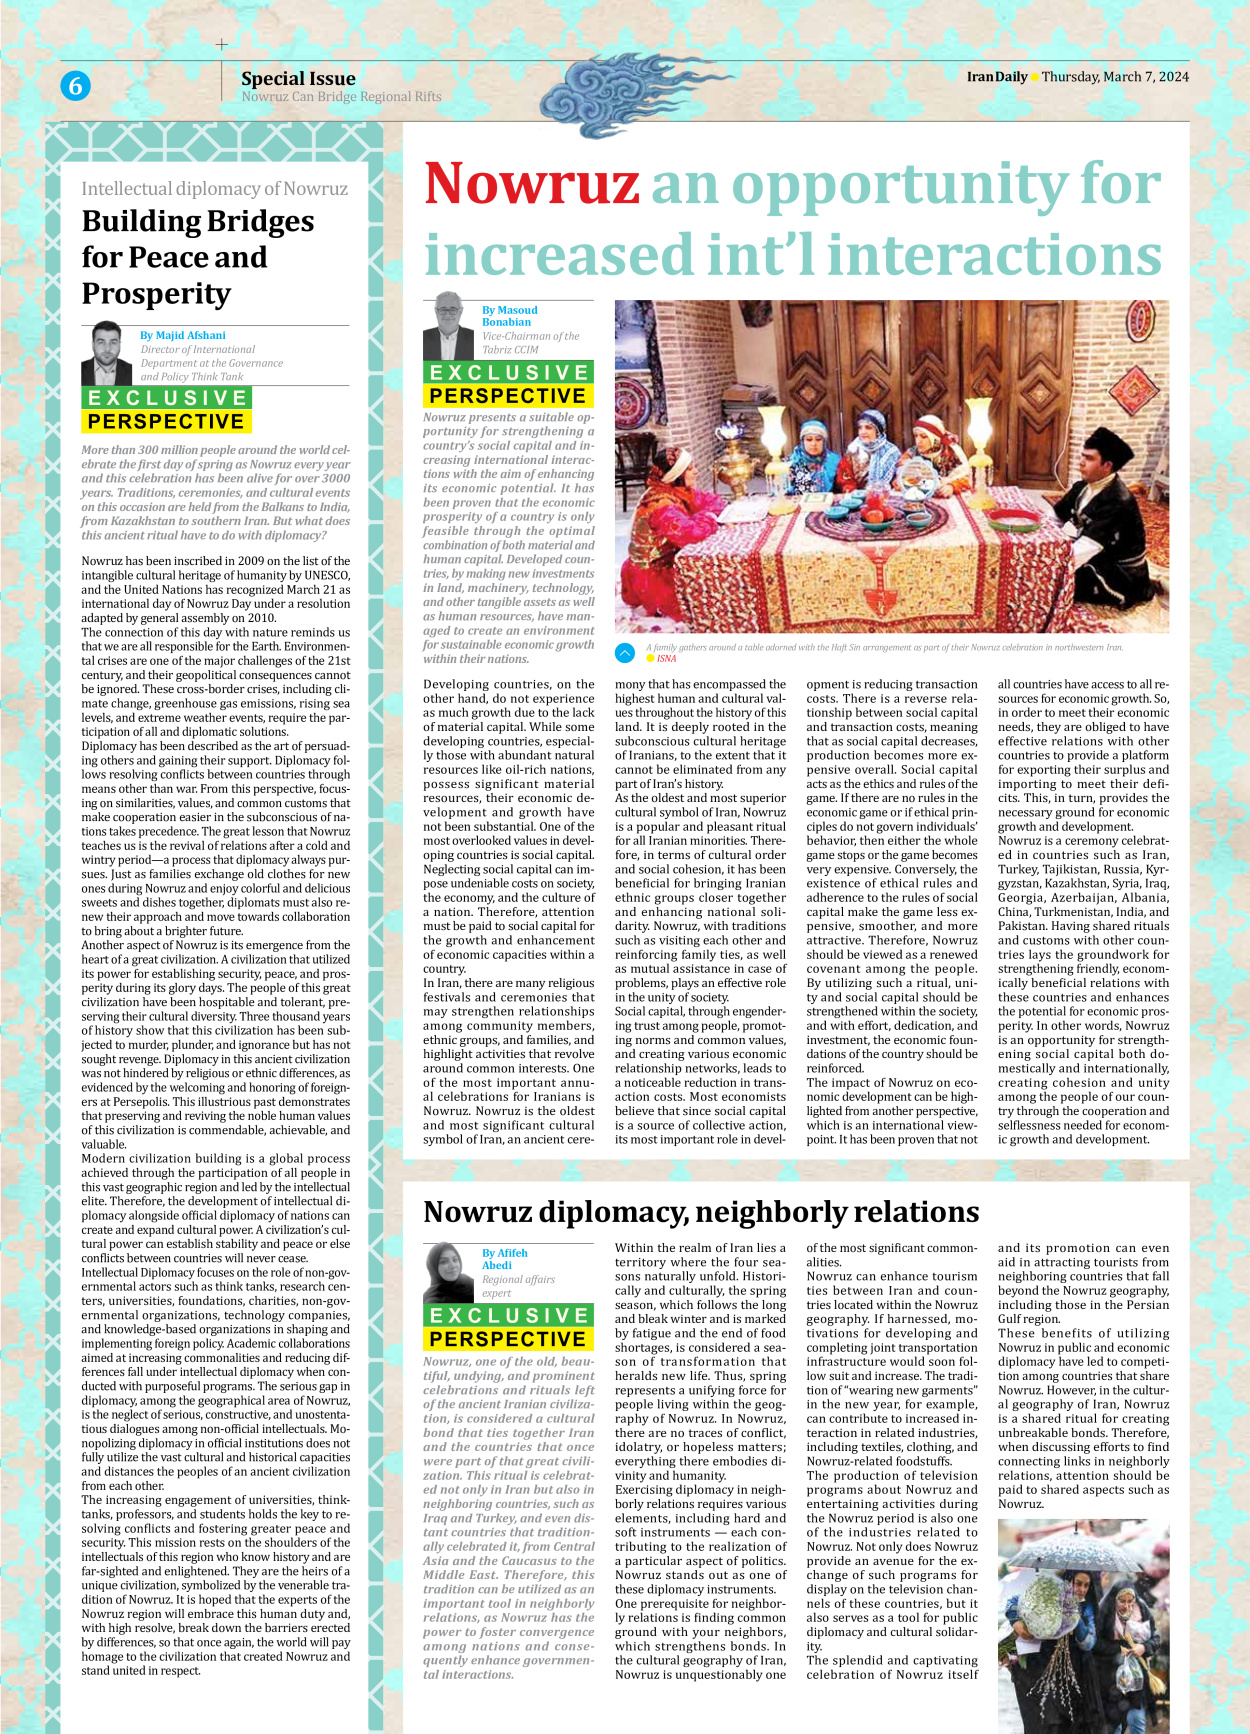 Iran Daily - Number Seven Thousand Five Hundred and Twenty Four - 07 March 2024 - Page 6